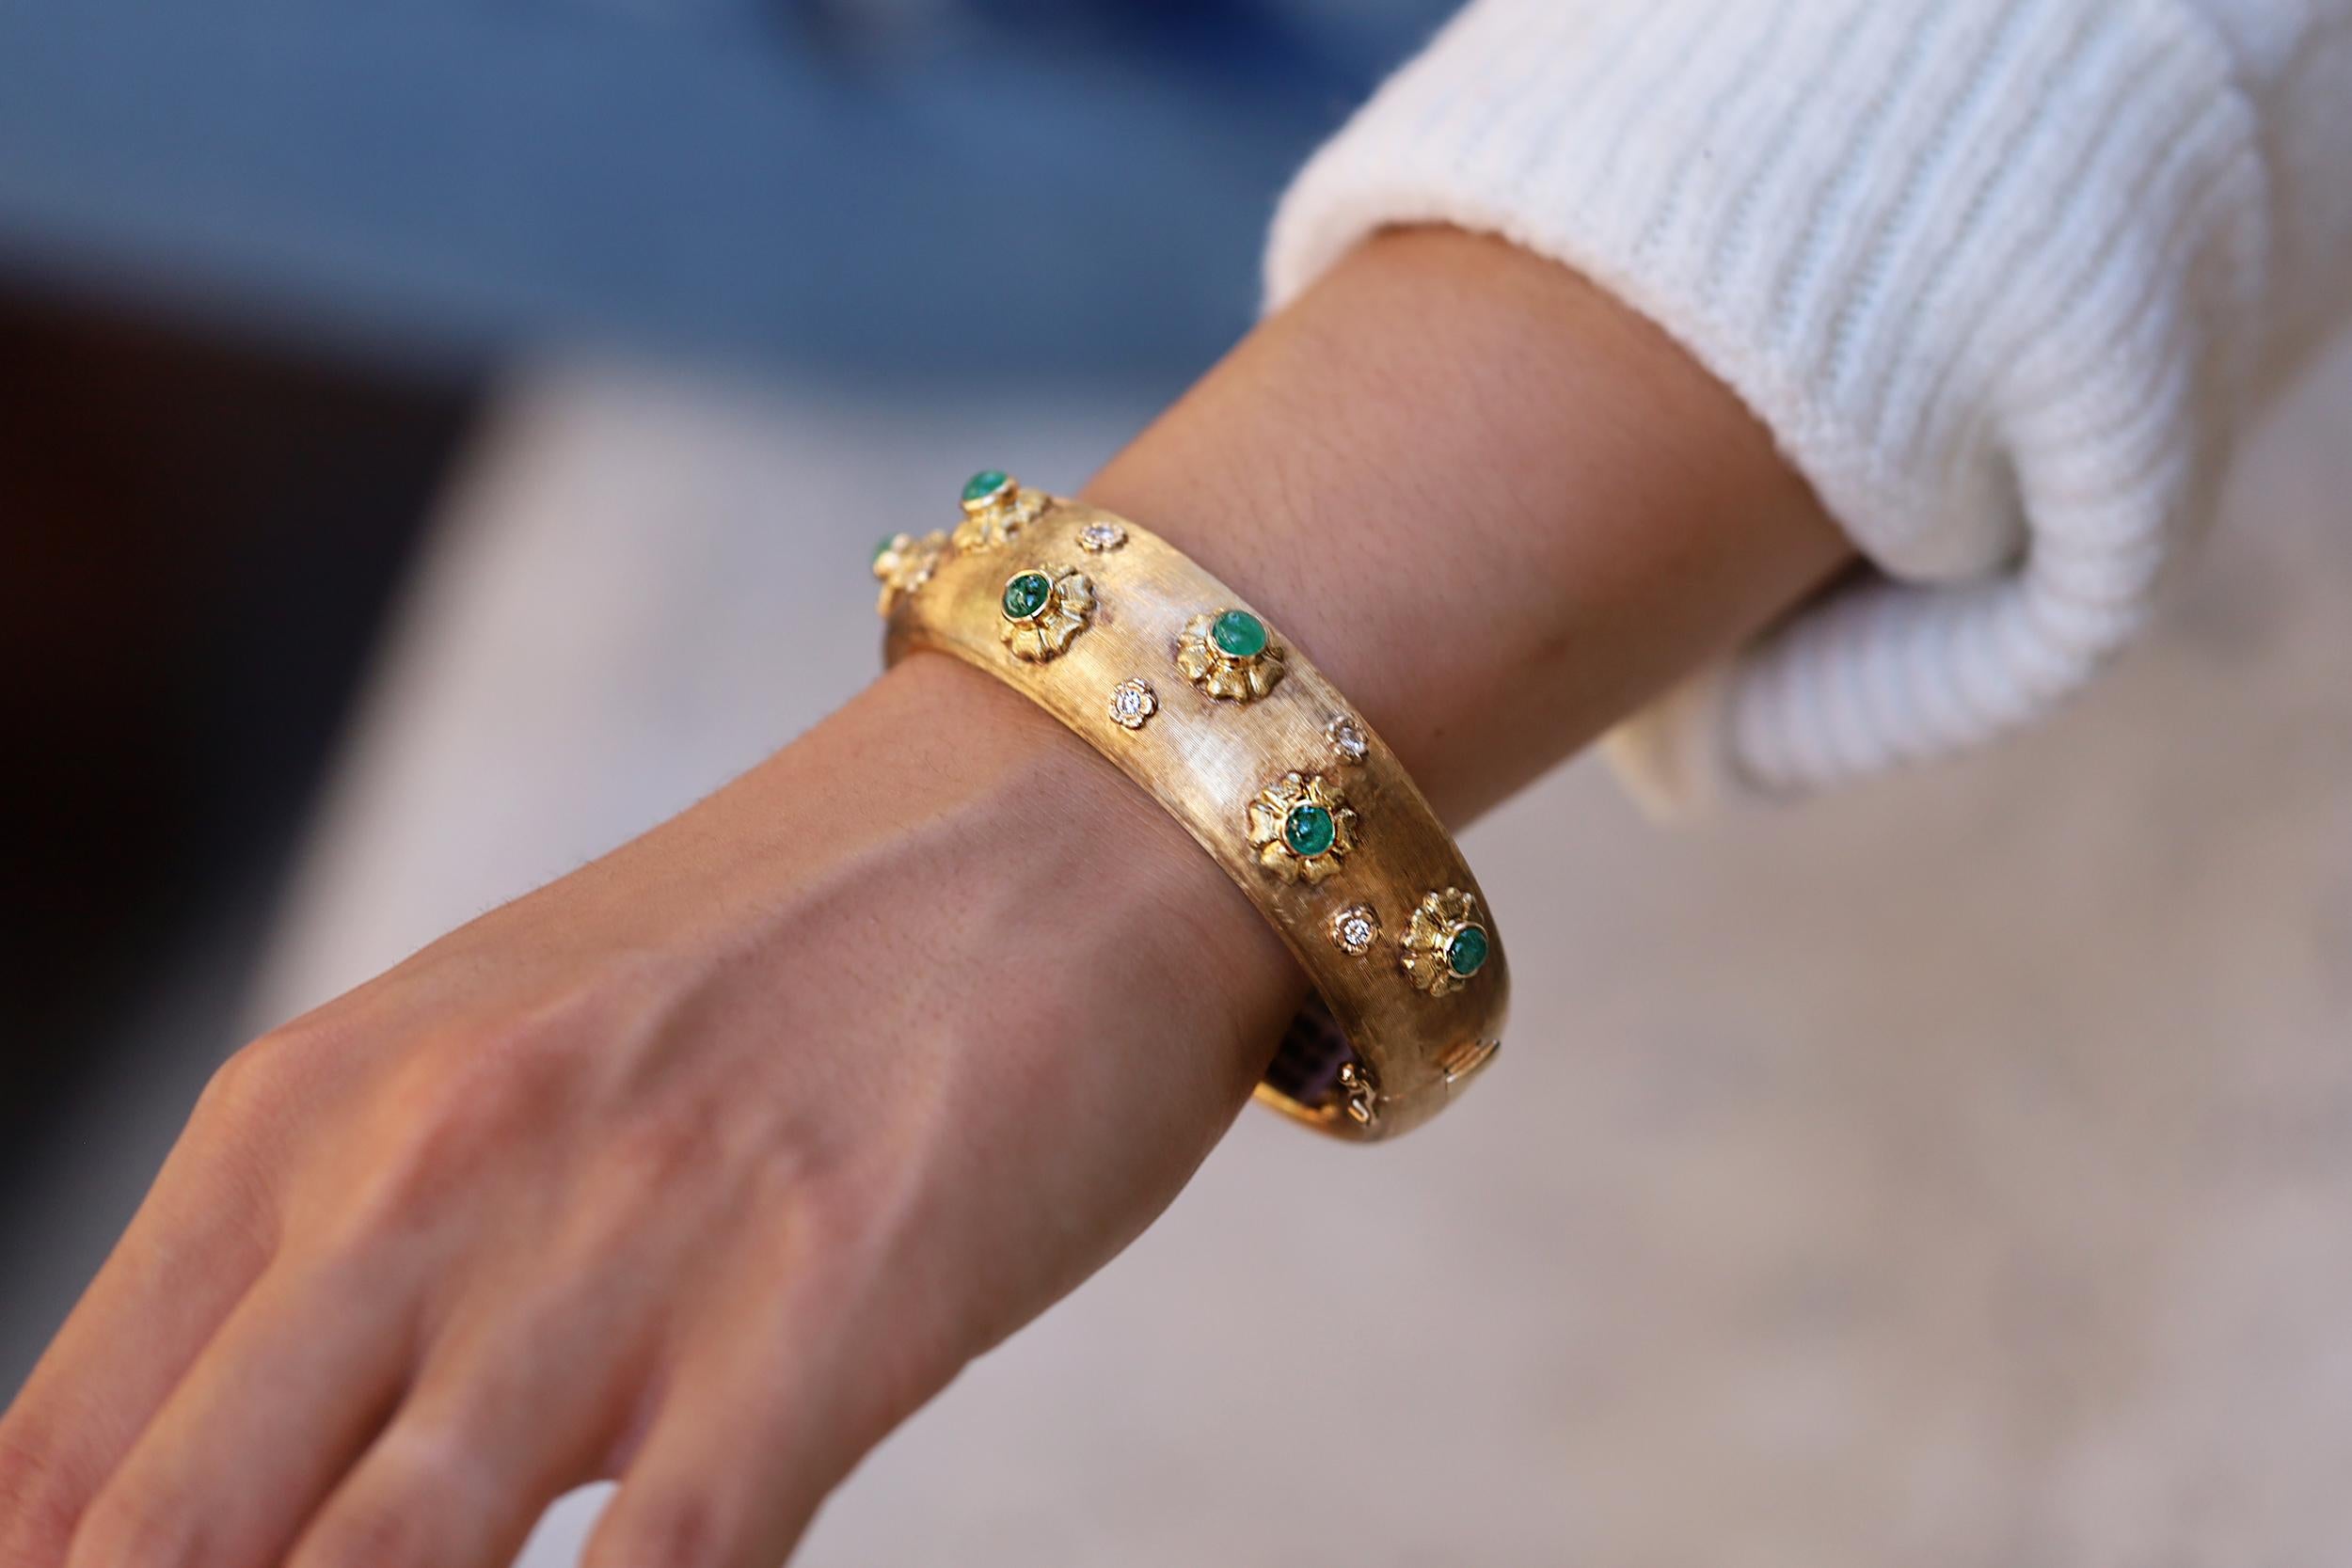 This highly unusual vintage 1960s bangle bracelet bursts with lush emerald cabochon gems. Its sparkling diamond accents bring a touch of luxe to the asymmetrical cuff. Expertly crafted in 14k gold with a brushed, Florentine finish, the bracelet's